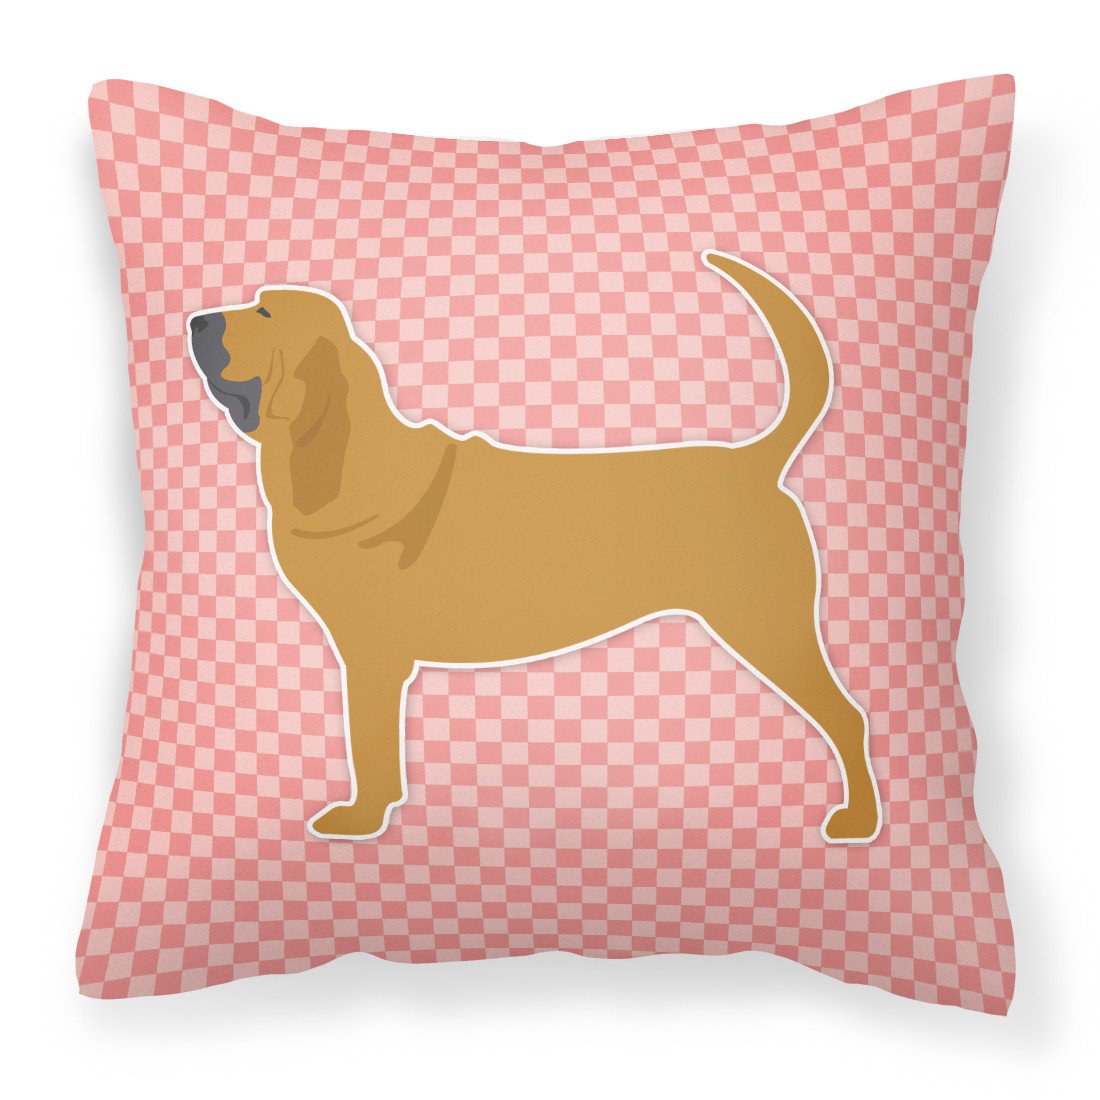 Bloodhound Checkerboard Pink Fabric Decorative Pillow BB3584PW1818 by Caroline's Treasures